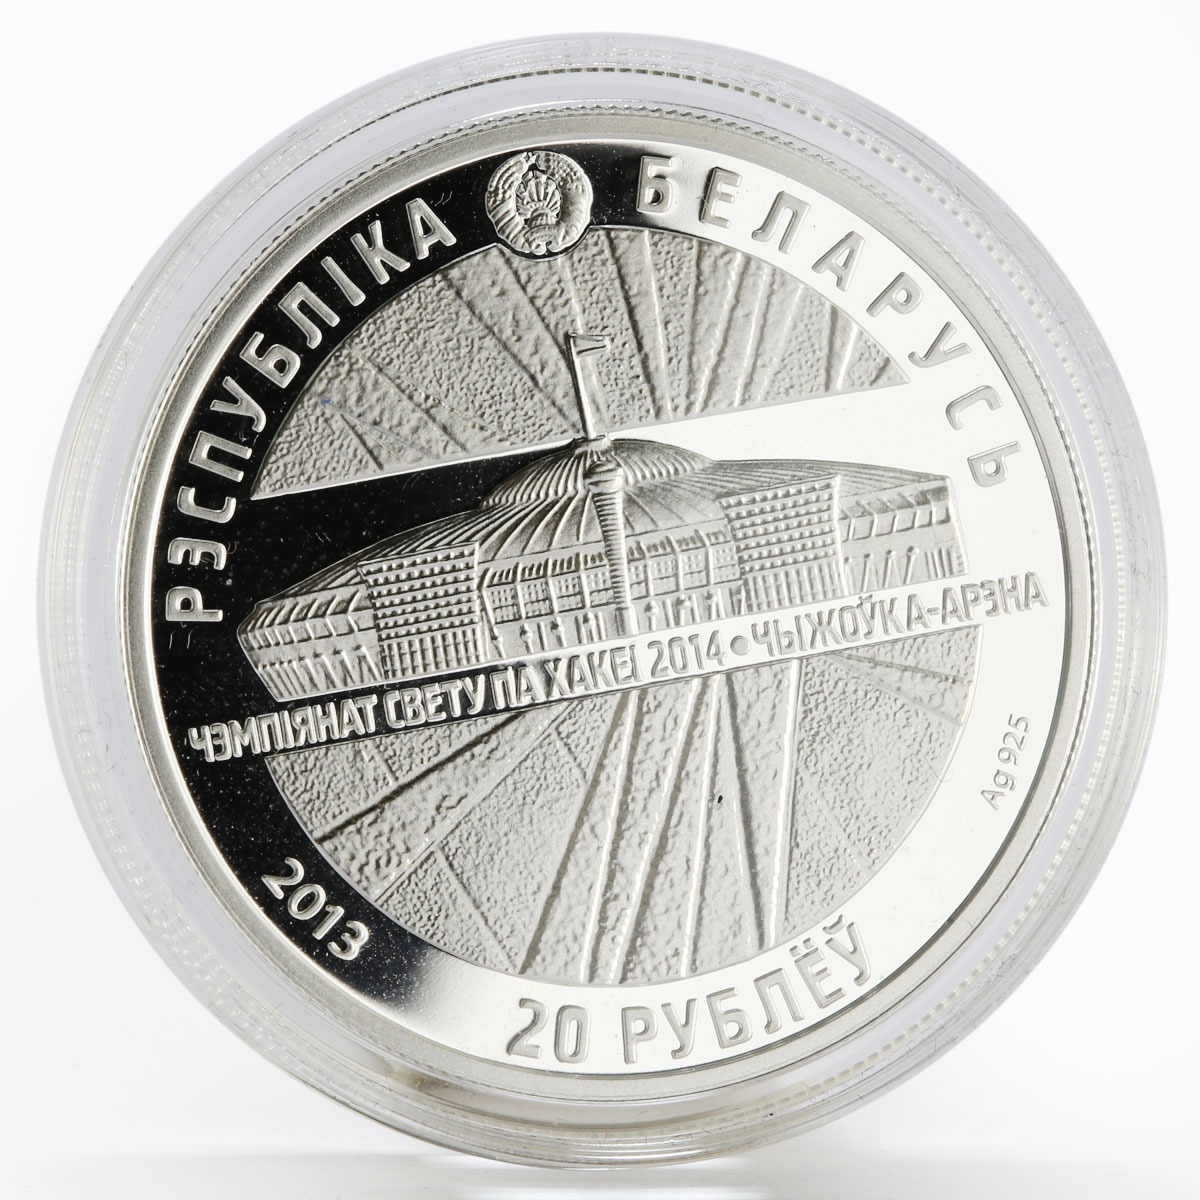 Belarus 20 rubles The 2014 World Ice Hockey Cup Chyzhouka Arena silver coin 2013